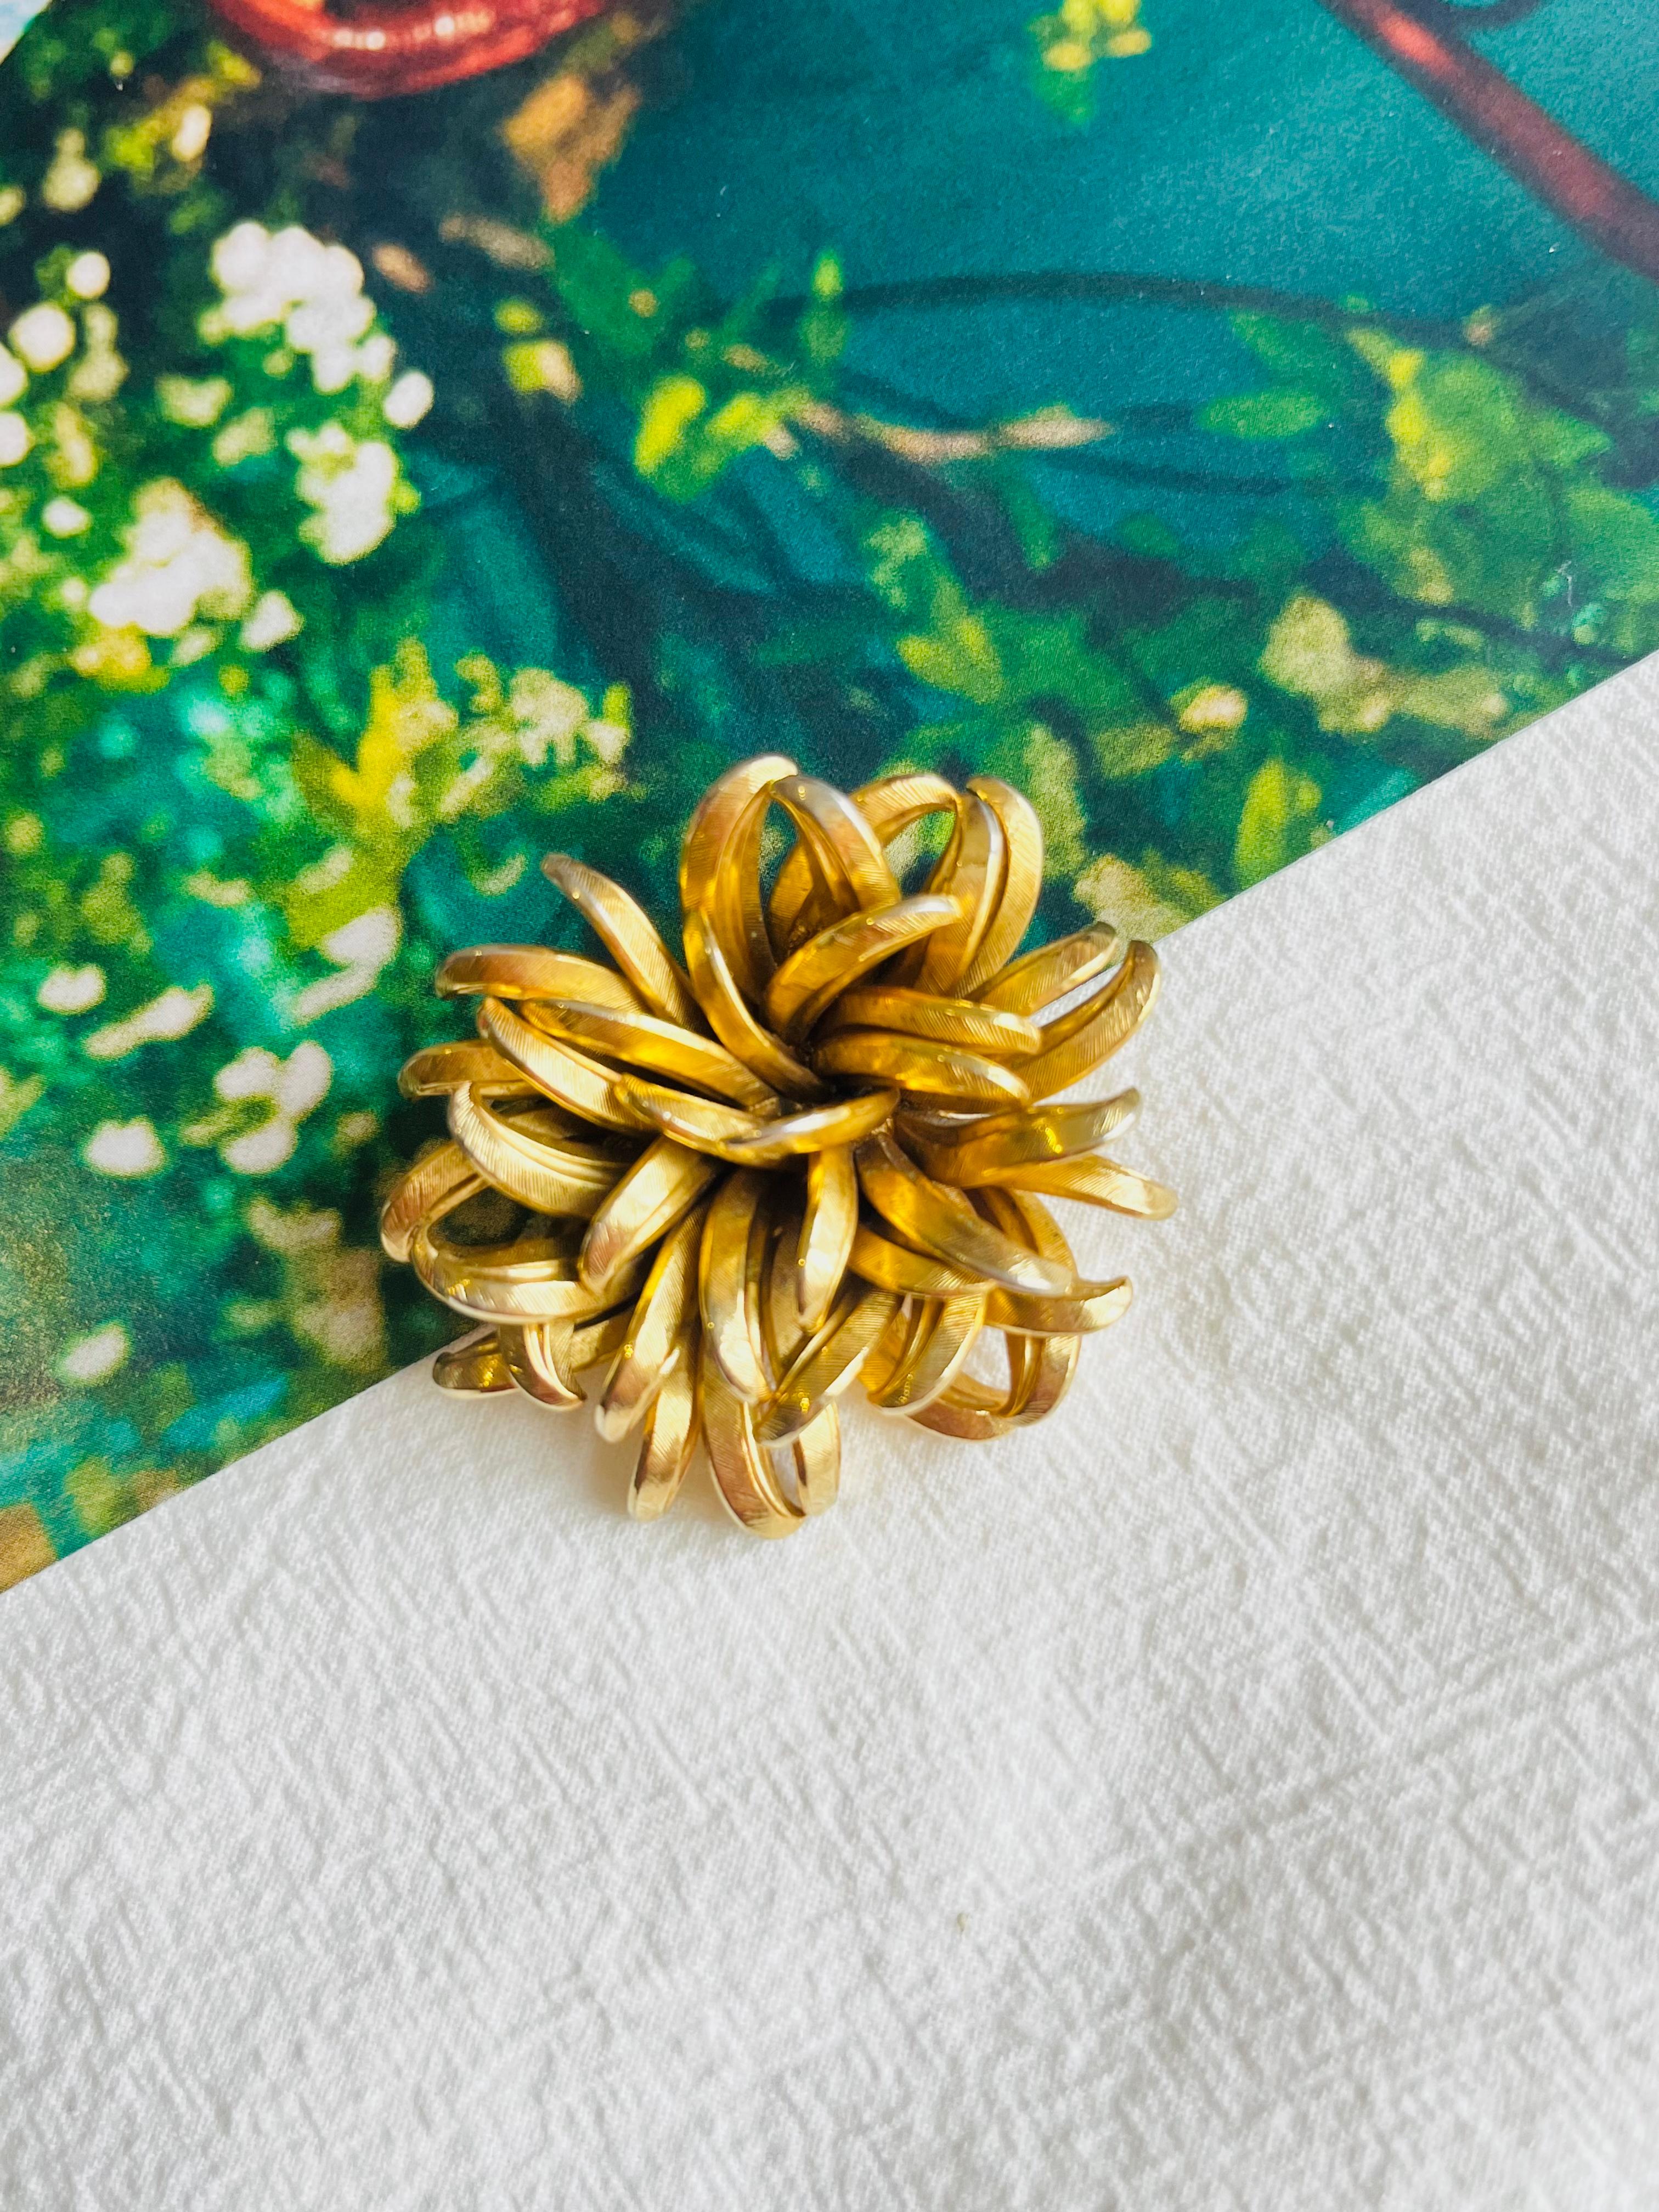 Christian Dior GROSSE 1958 Vintage Large Vivid Flower Gold Exquisite Brooch In Good Condition For Sale In Wokingham, England